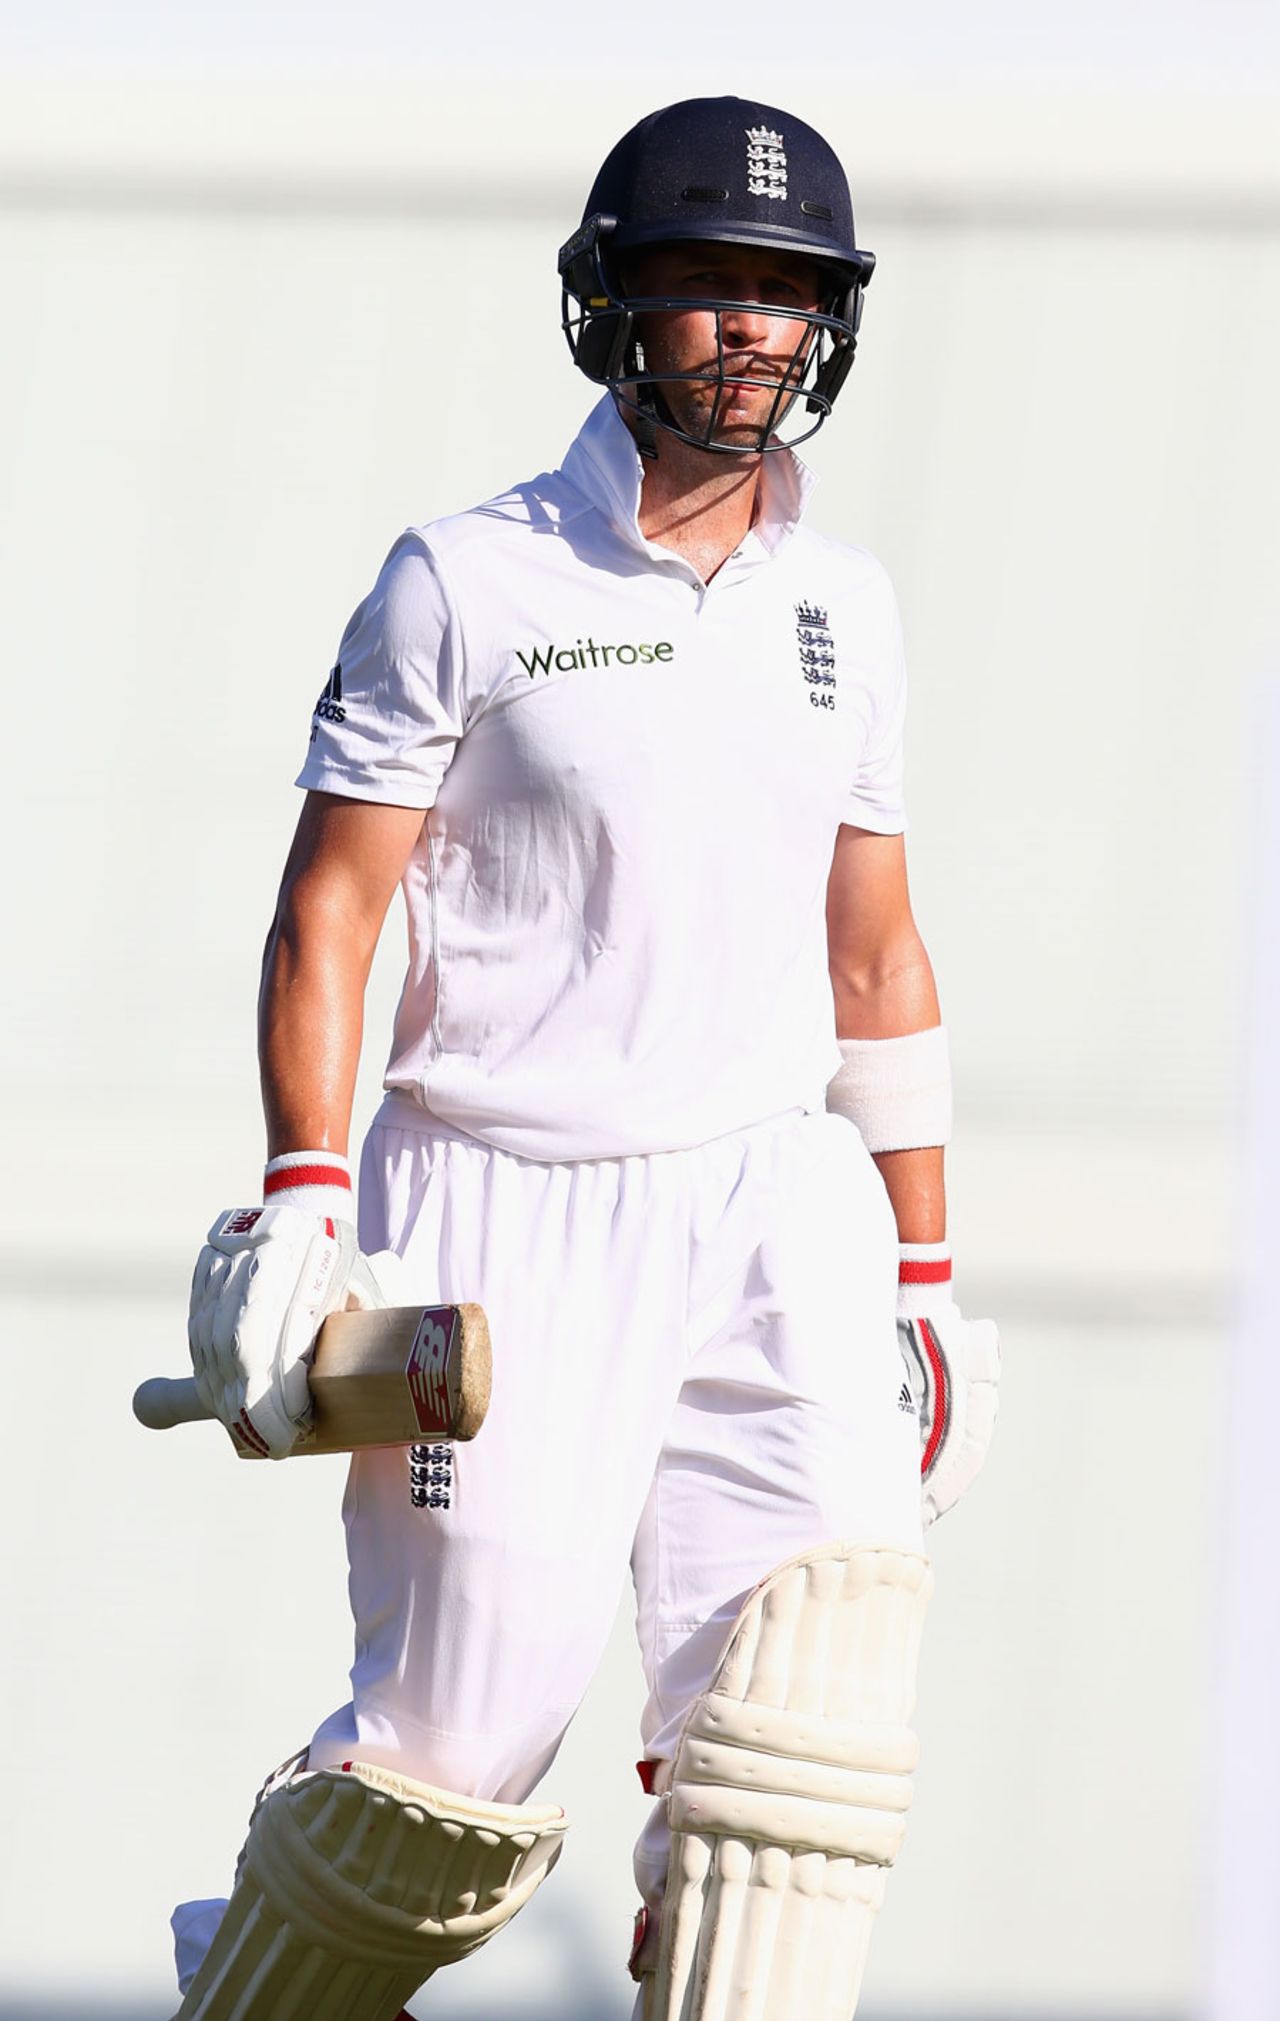 Jonathan Trott heads off after making 9, West Indies v England, 3rd Test, Bridgetown, 2nd day, May 2, 2015